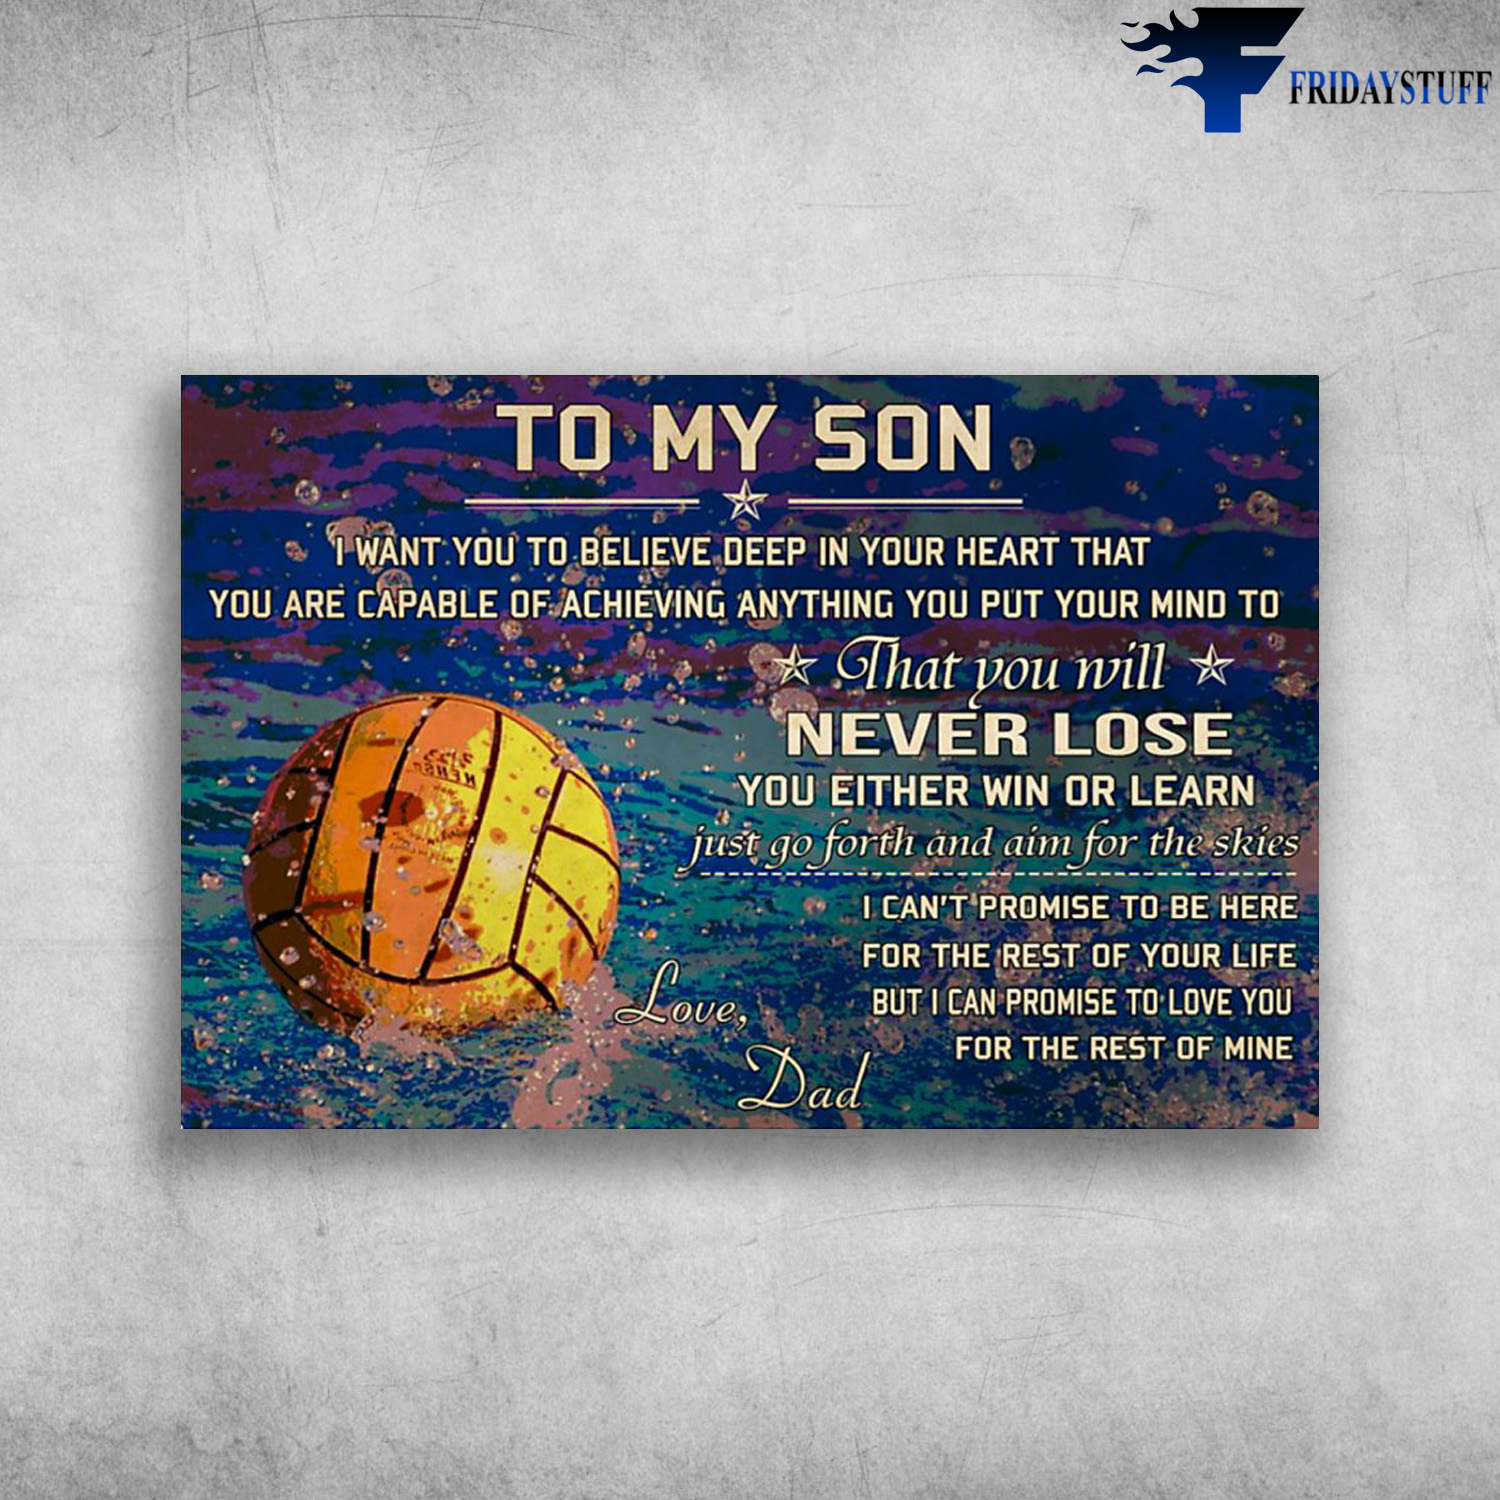 Water Polo - To My Son, I Want You To Believe Deep In Your Heart, That You Are Capable Of Achieving Anything You Put Your Mind To, That You Will Never Lose, You Either Win Or Learn, Just Go Forth And Aim For The Skies